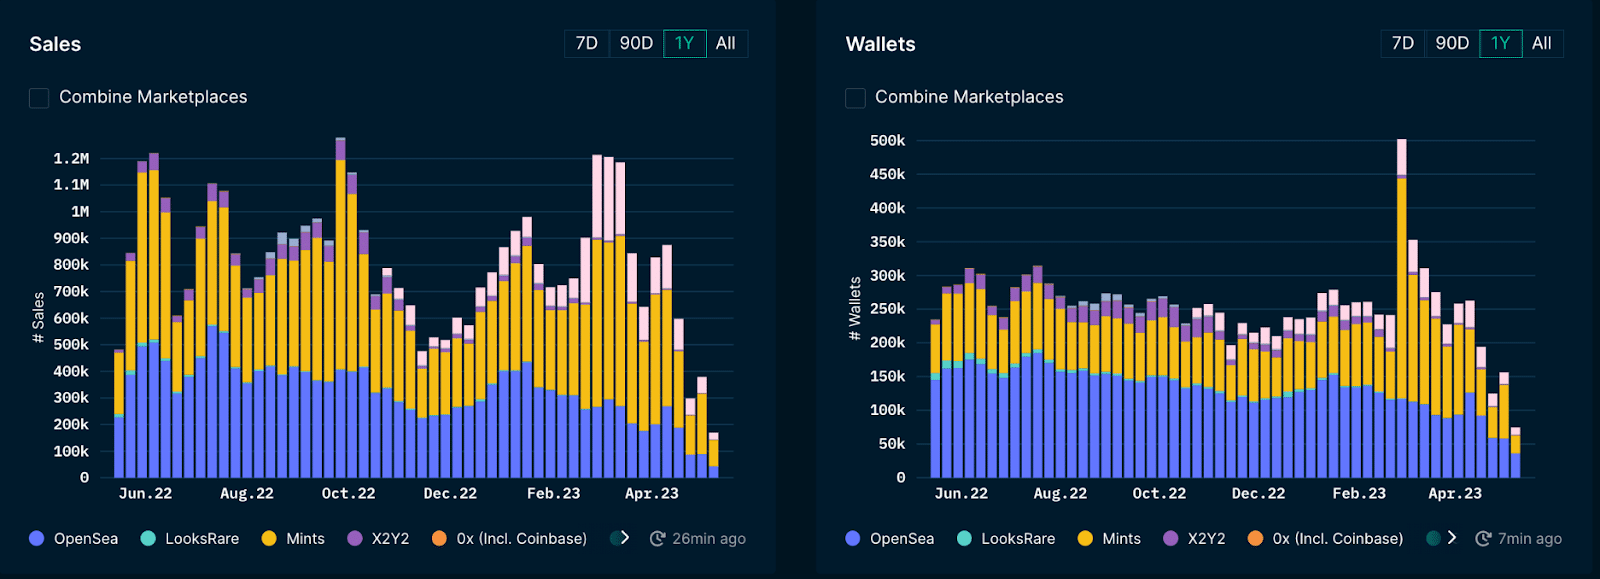 A visualization of NFT sales and wallets between January 2022 and April 2023.